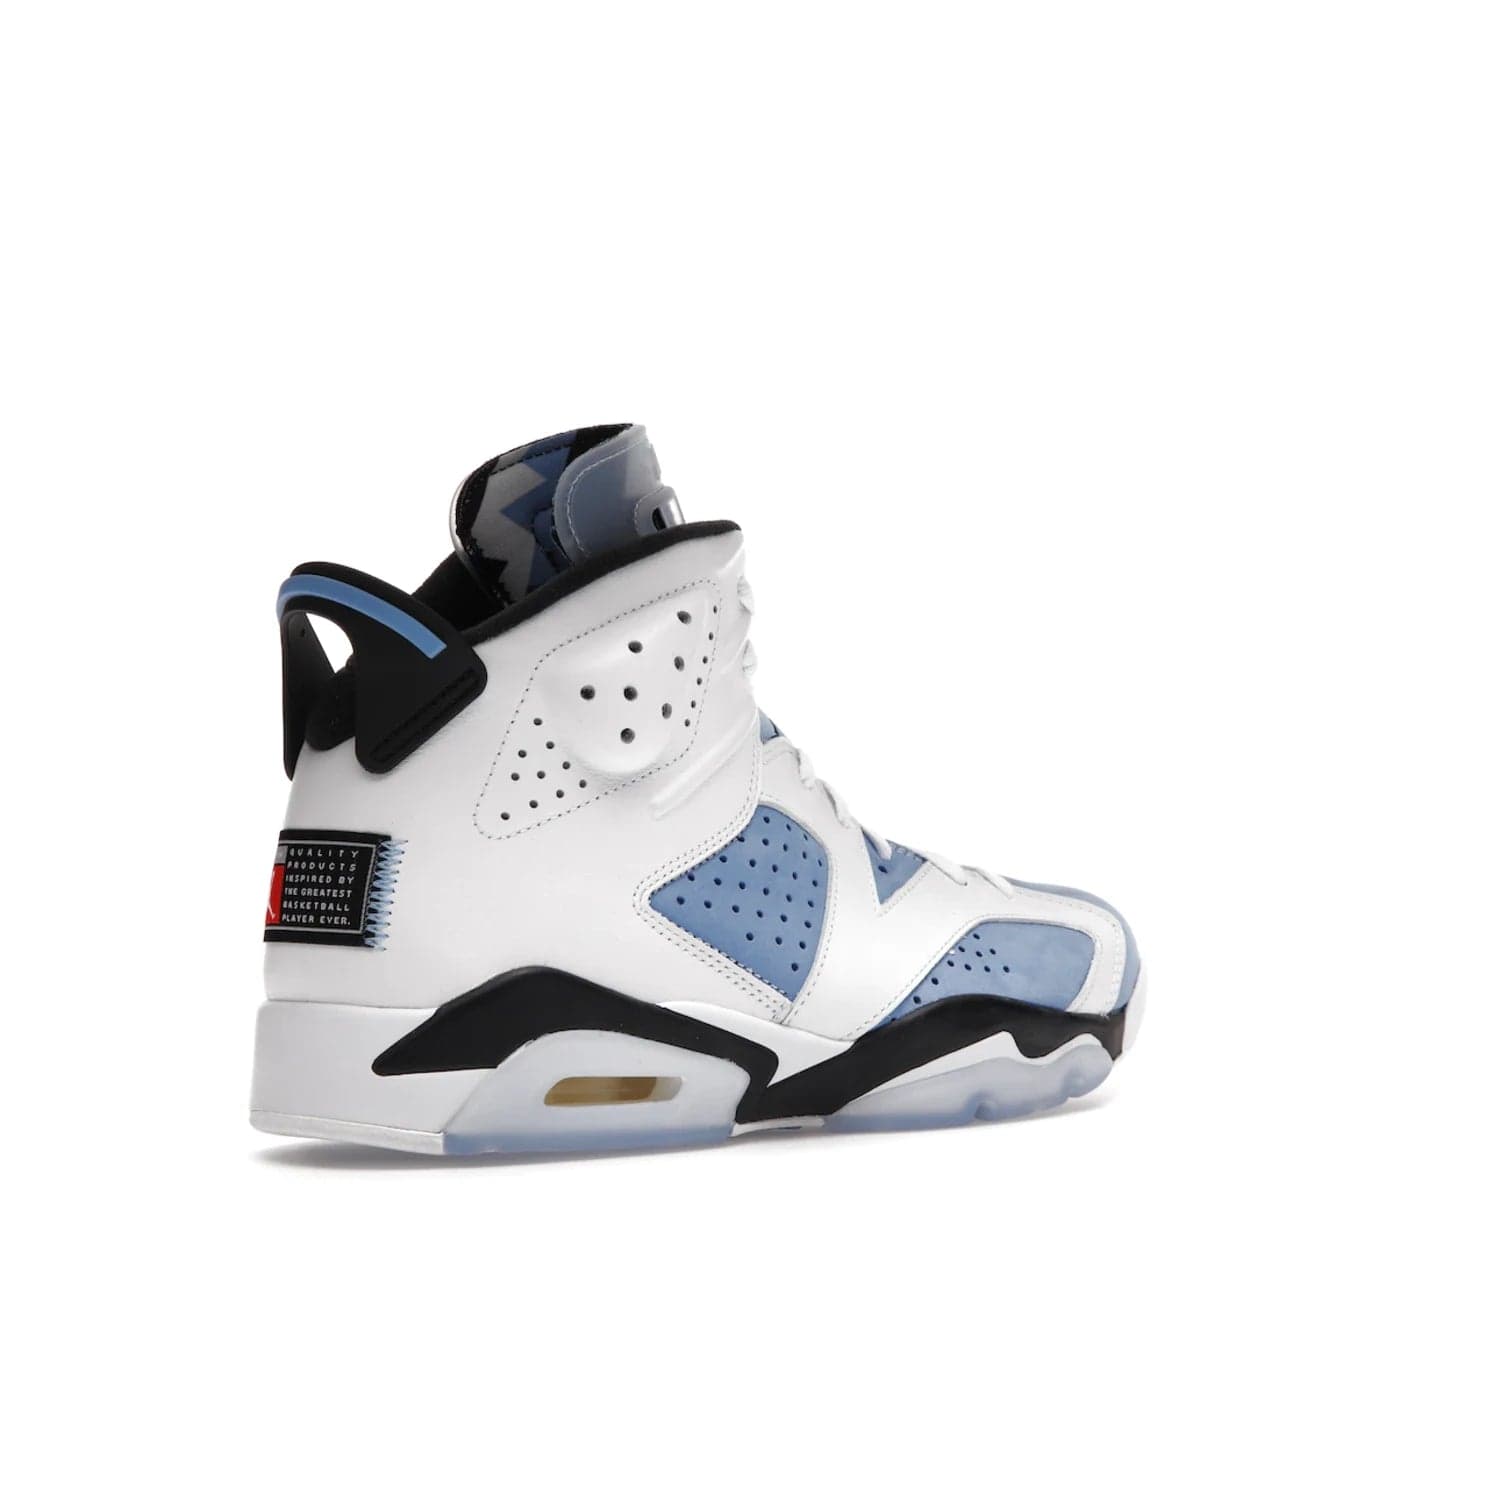 Jordan 6 Retro UNC White - Image 33 - Only at www.BallersClubKickz.com - Air Jordan 6 Retro UNC White with classic UNC colors brings nostalgia and style to a legendary silhouette. Celebrate MJ's alma mater with navy blue accents, icy semi-translucent sole and Jordan Team patch. Out March 2022 for the Sneaker Enthusiast.